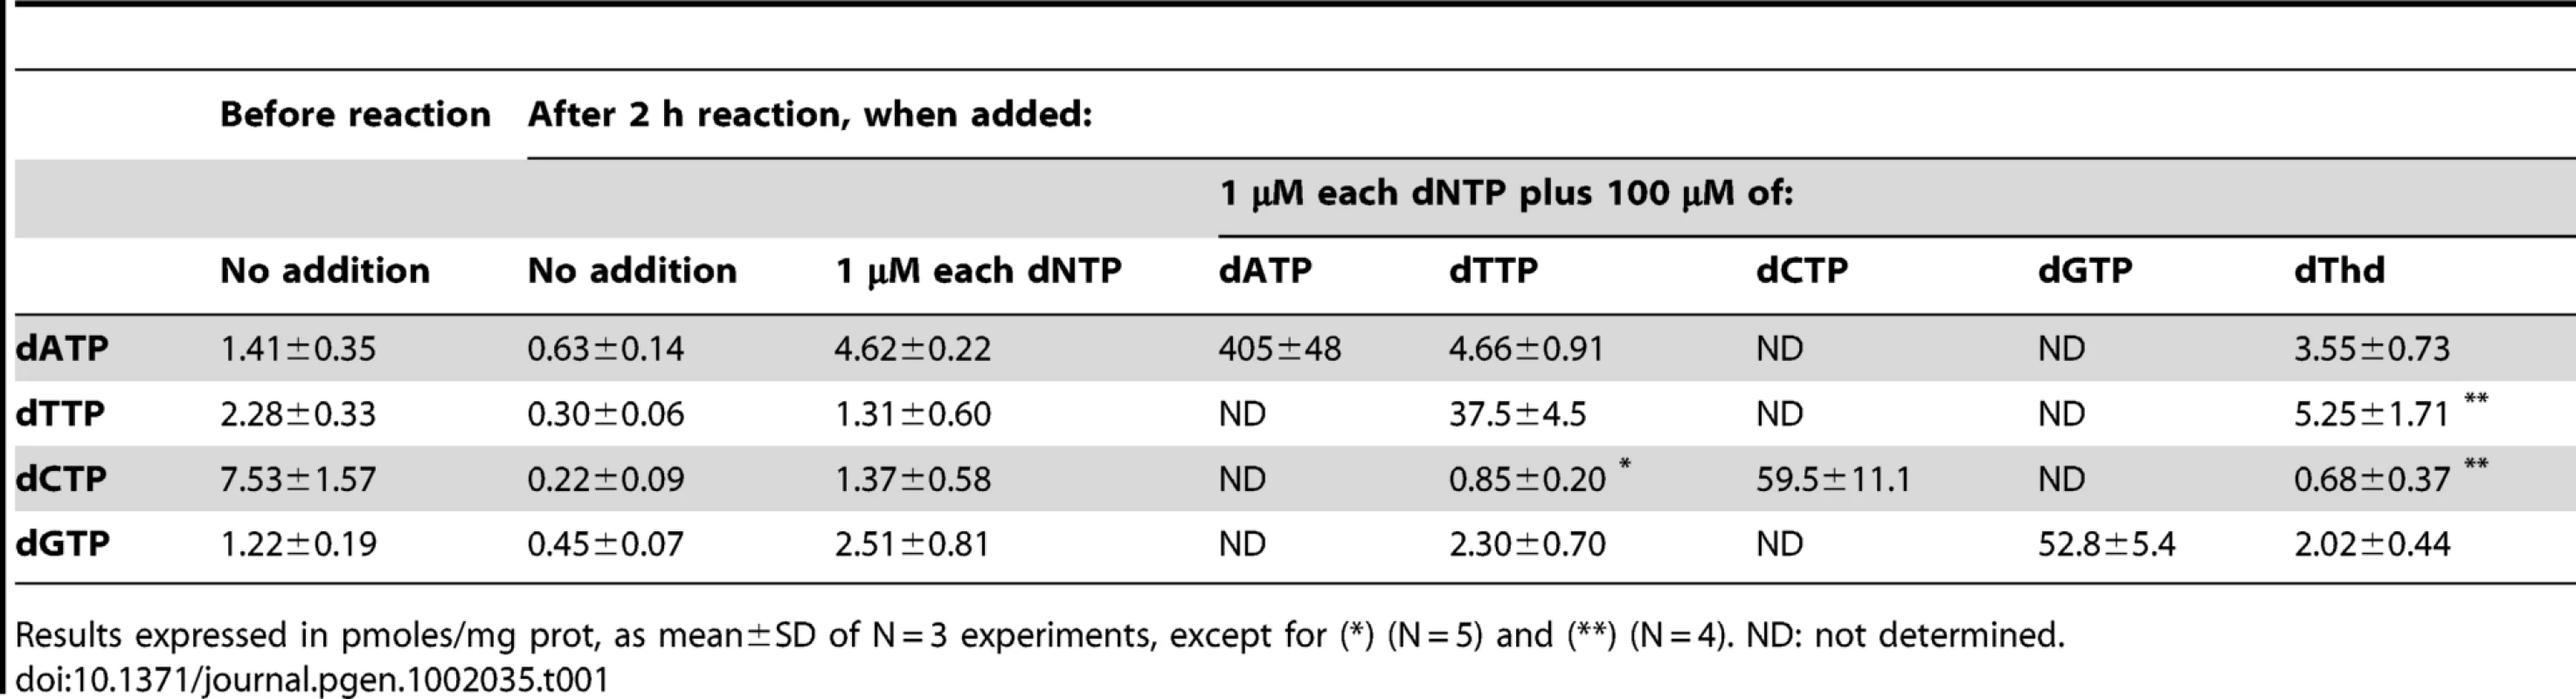 Effect of exogenous dNTP addition on intramitochondrial dNTP pools.